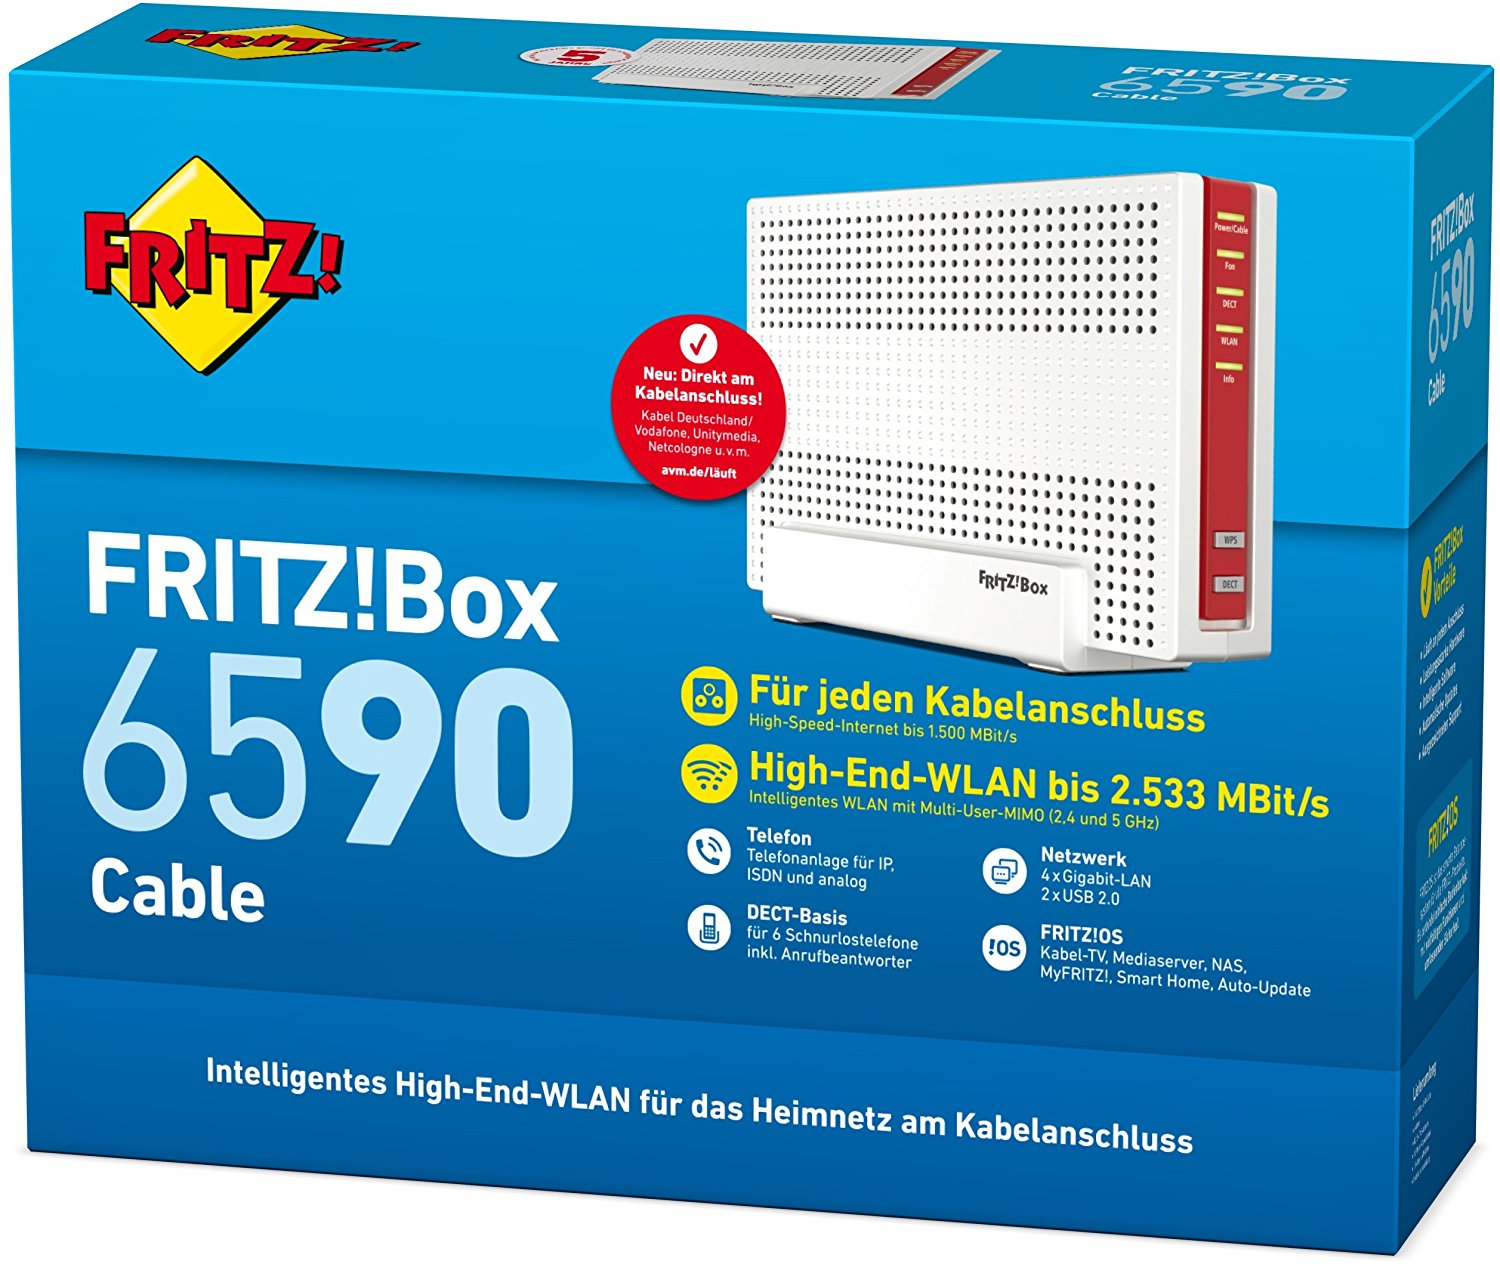 AVM FRITZ!Box 6590 Cable Kabel-WLAN-Router